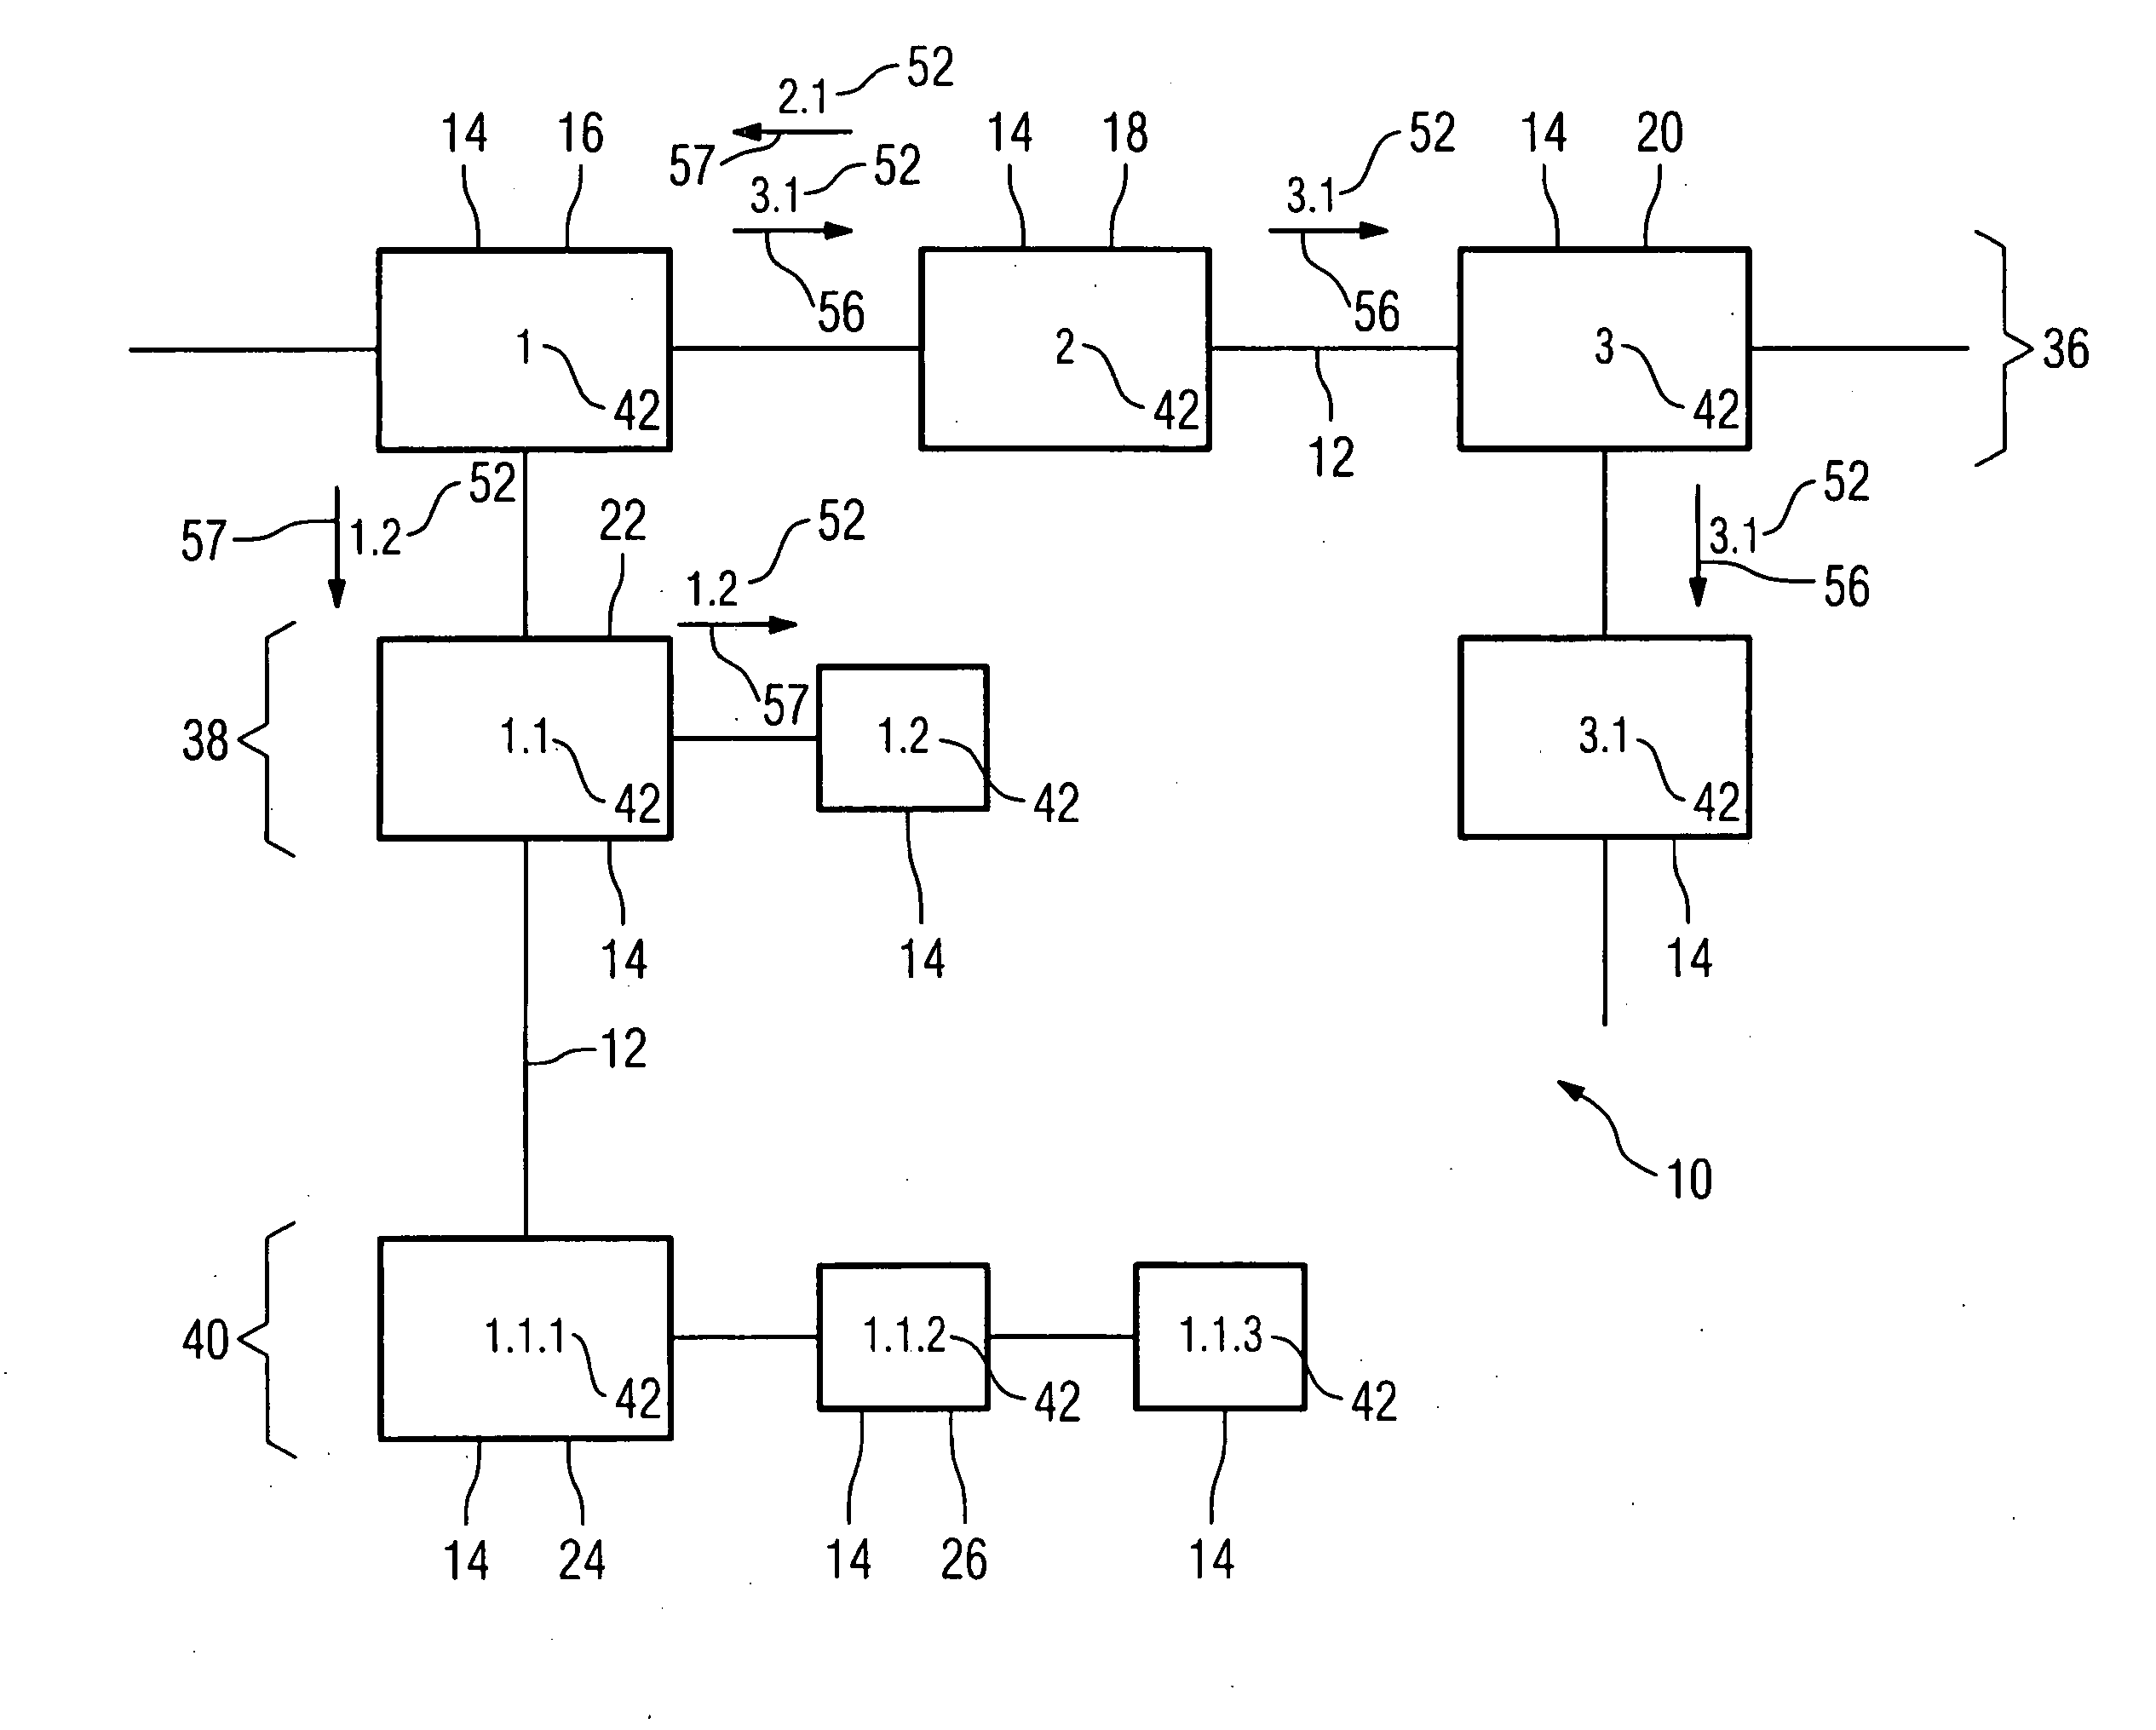 Network component, method for the operation of such a network component, and automation system with such a network component